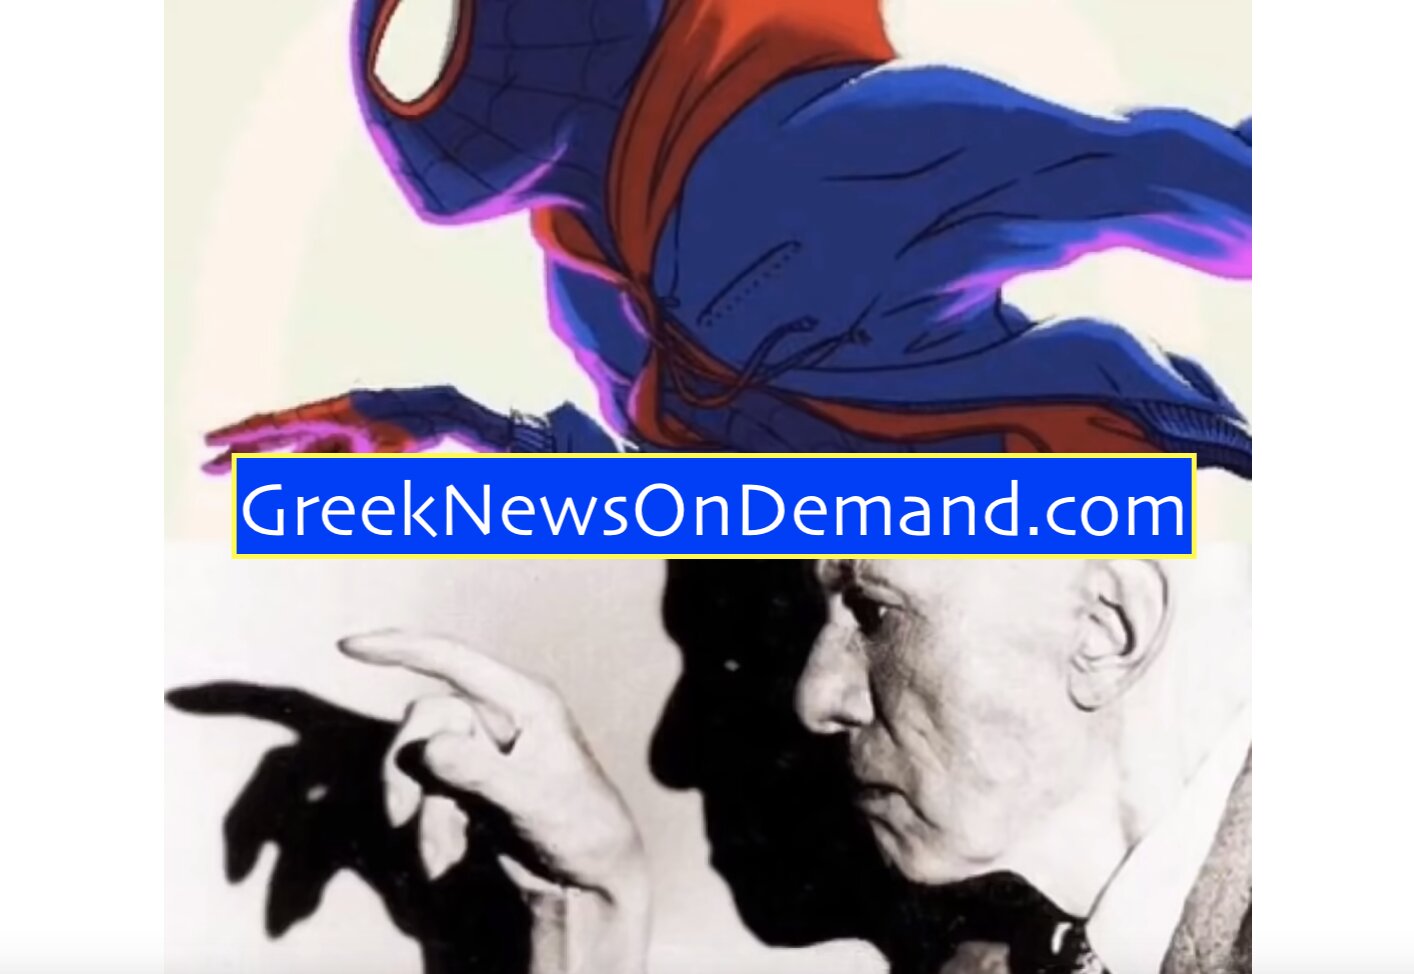 Spiderman is Aleister Crowley!!! “Sex-Magic Babies” and Zionist “Barbecued American pig”.